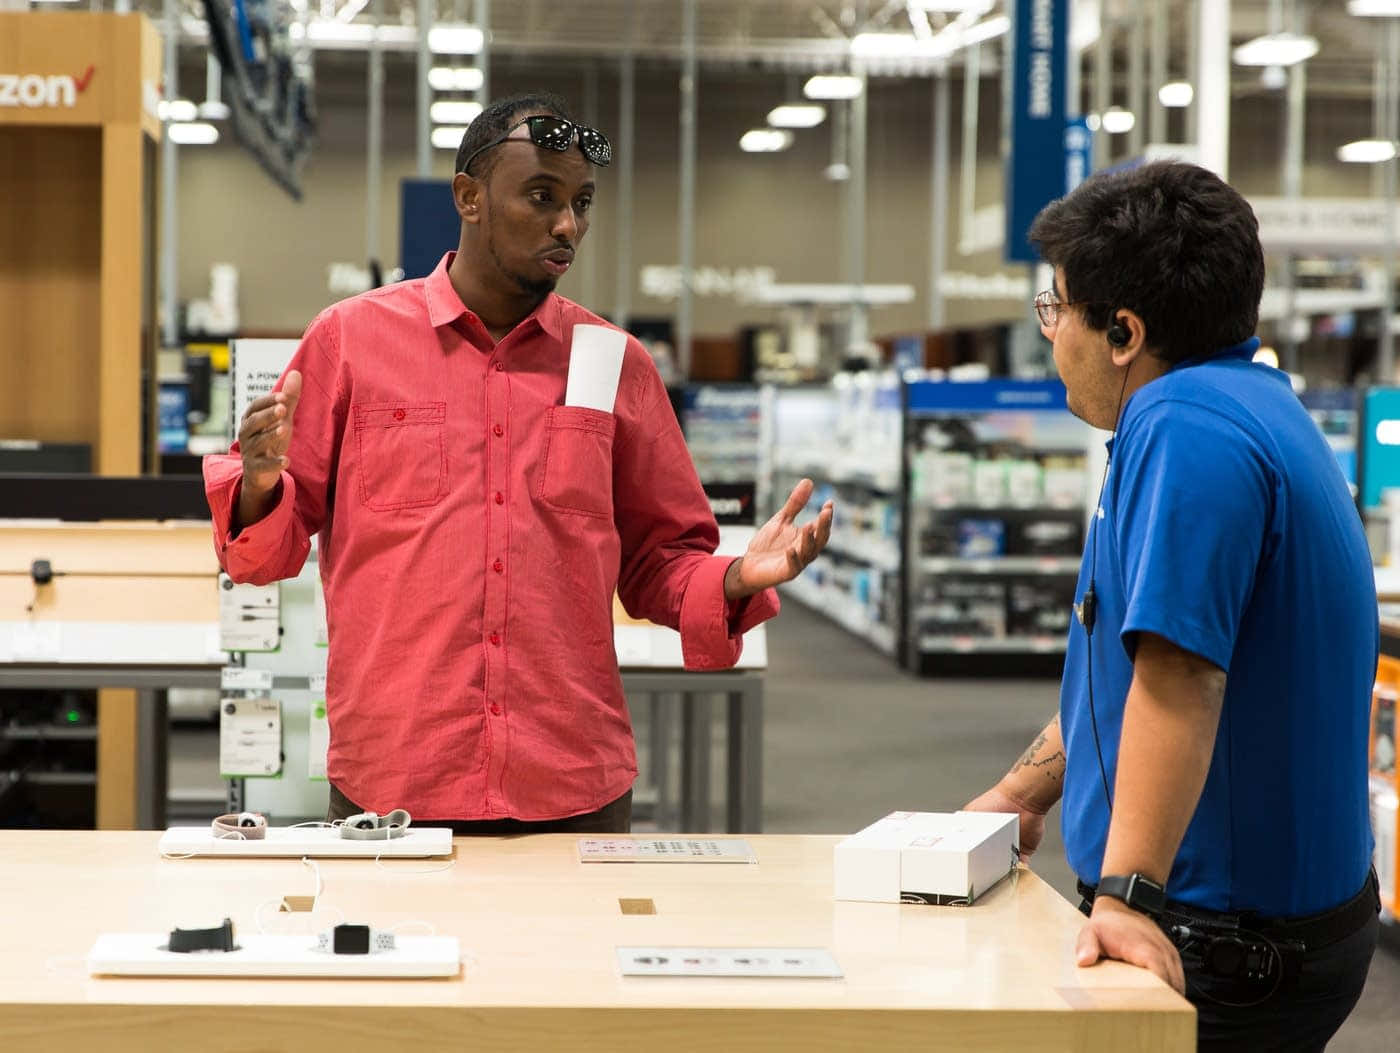 Shop Smart and Save at Best Buy